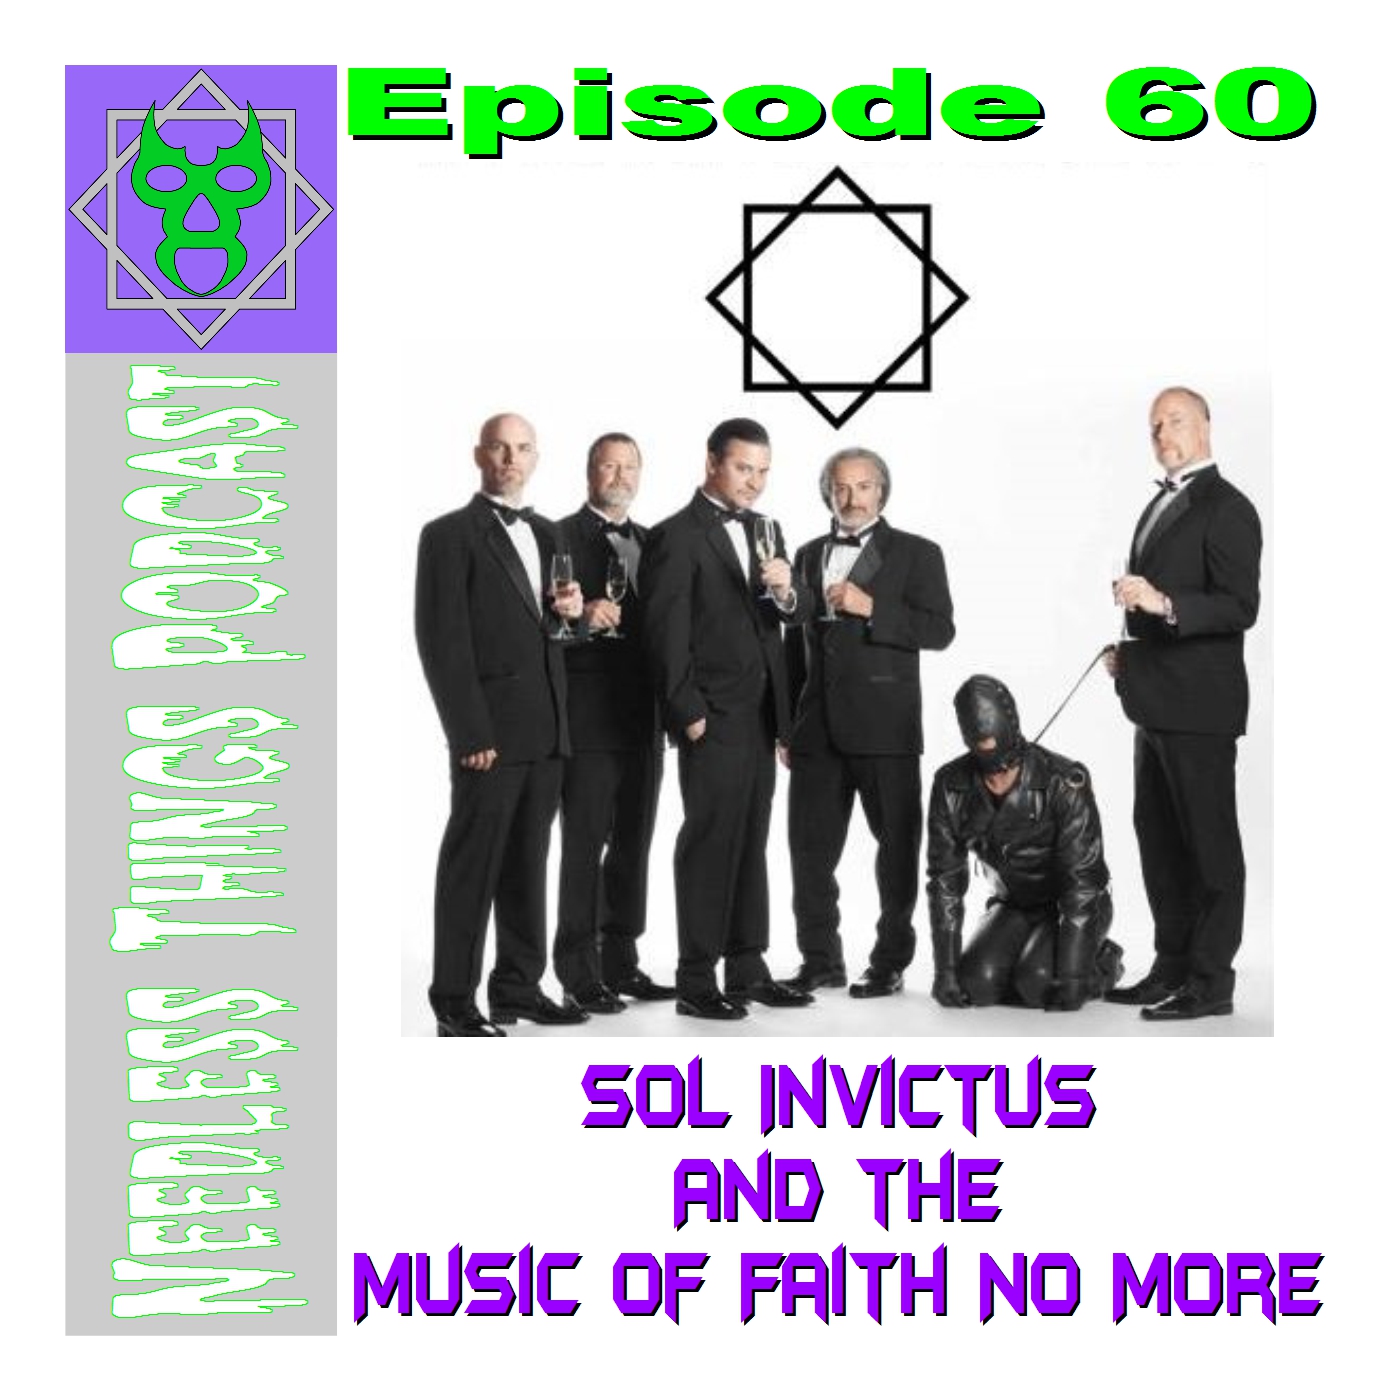 Needless Things Podcast 60 – Sol Invictus and the Music of Faith No More